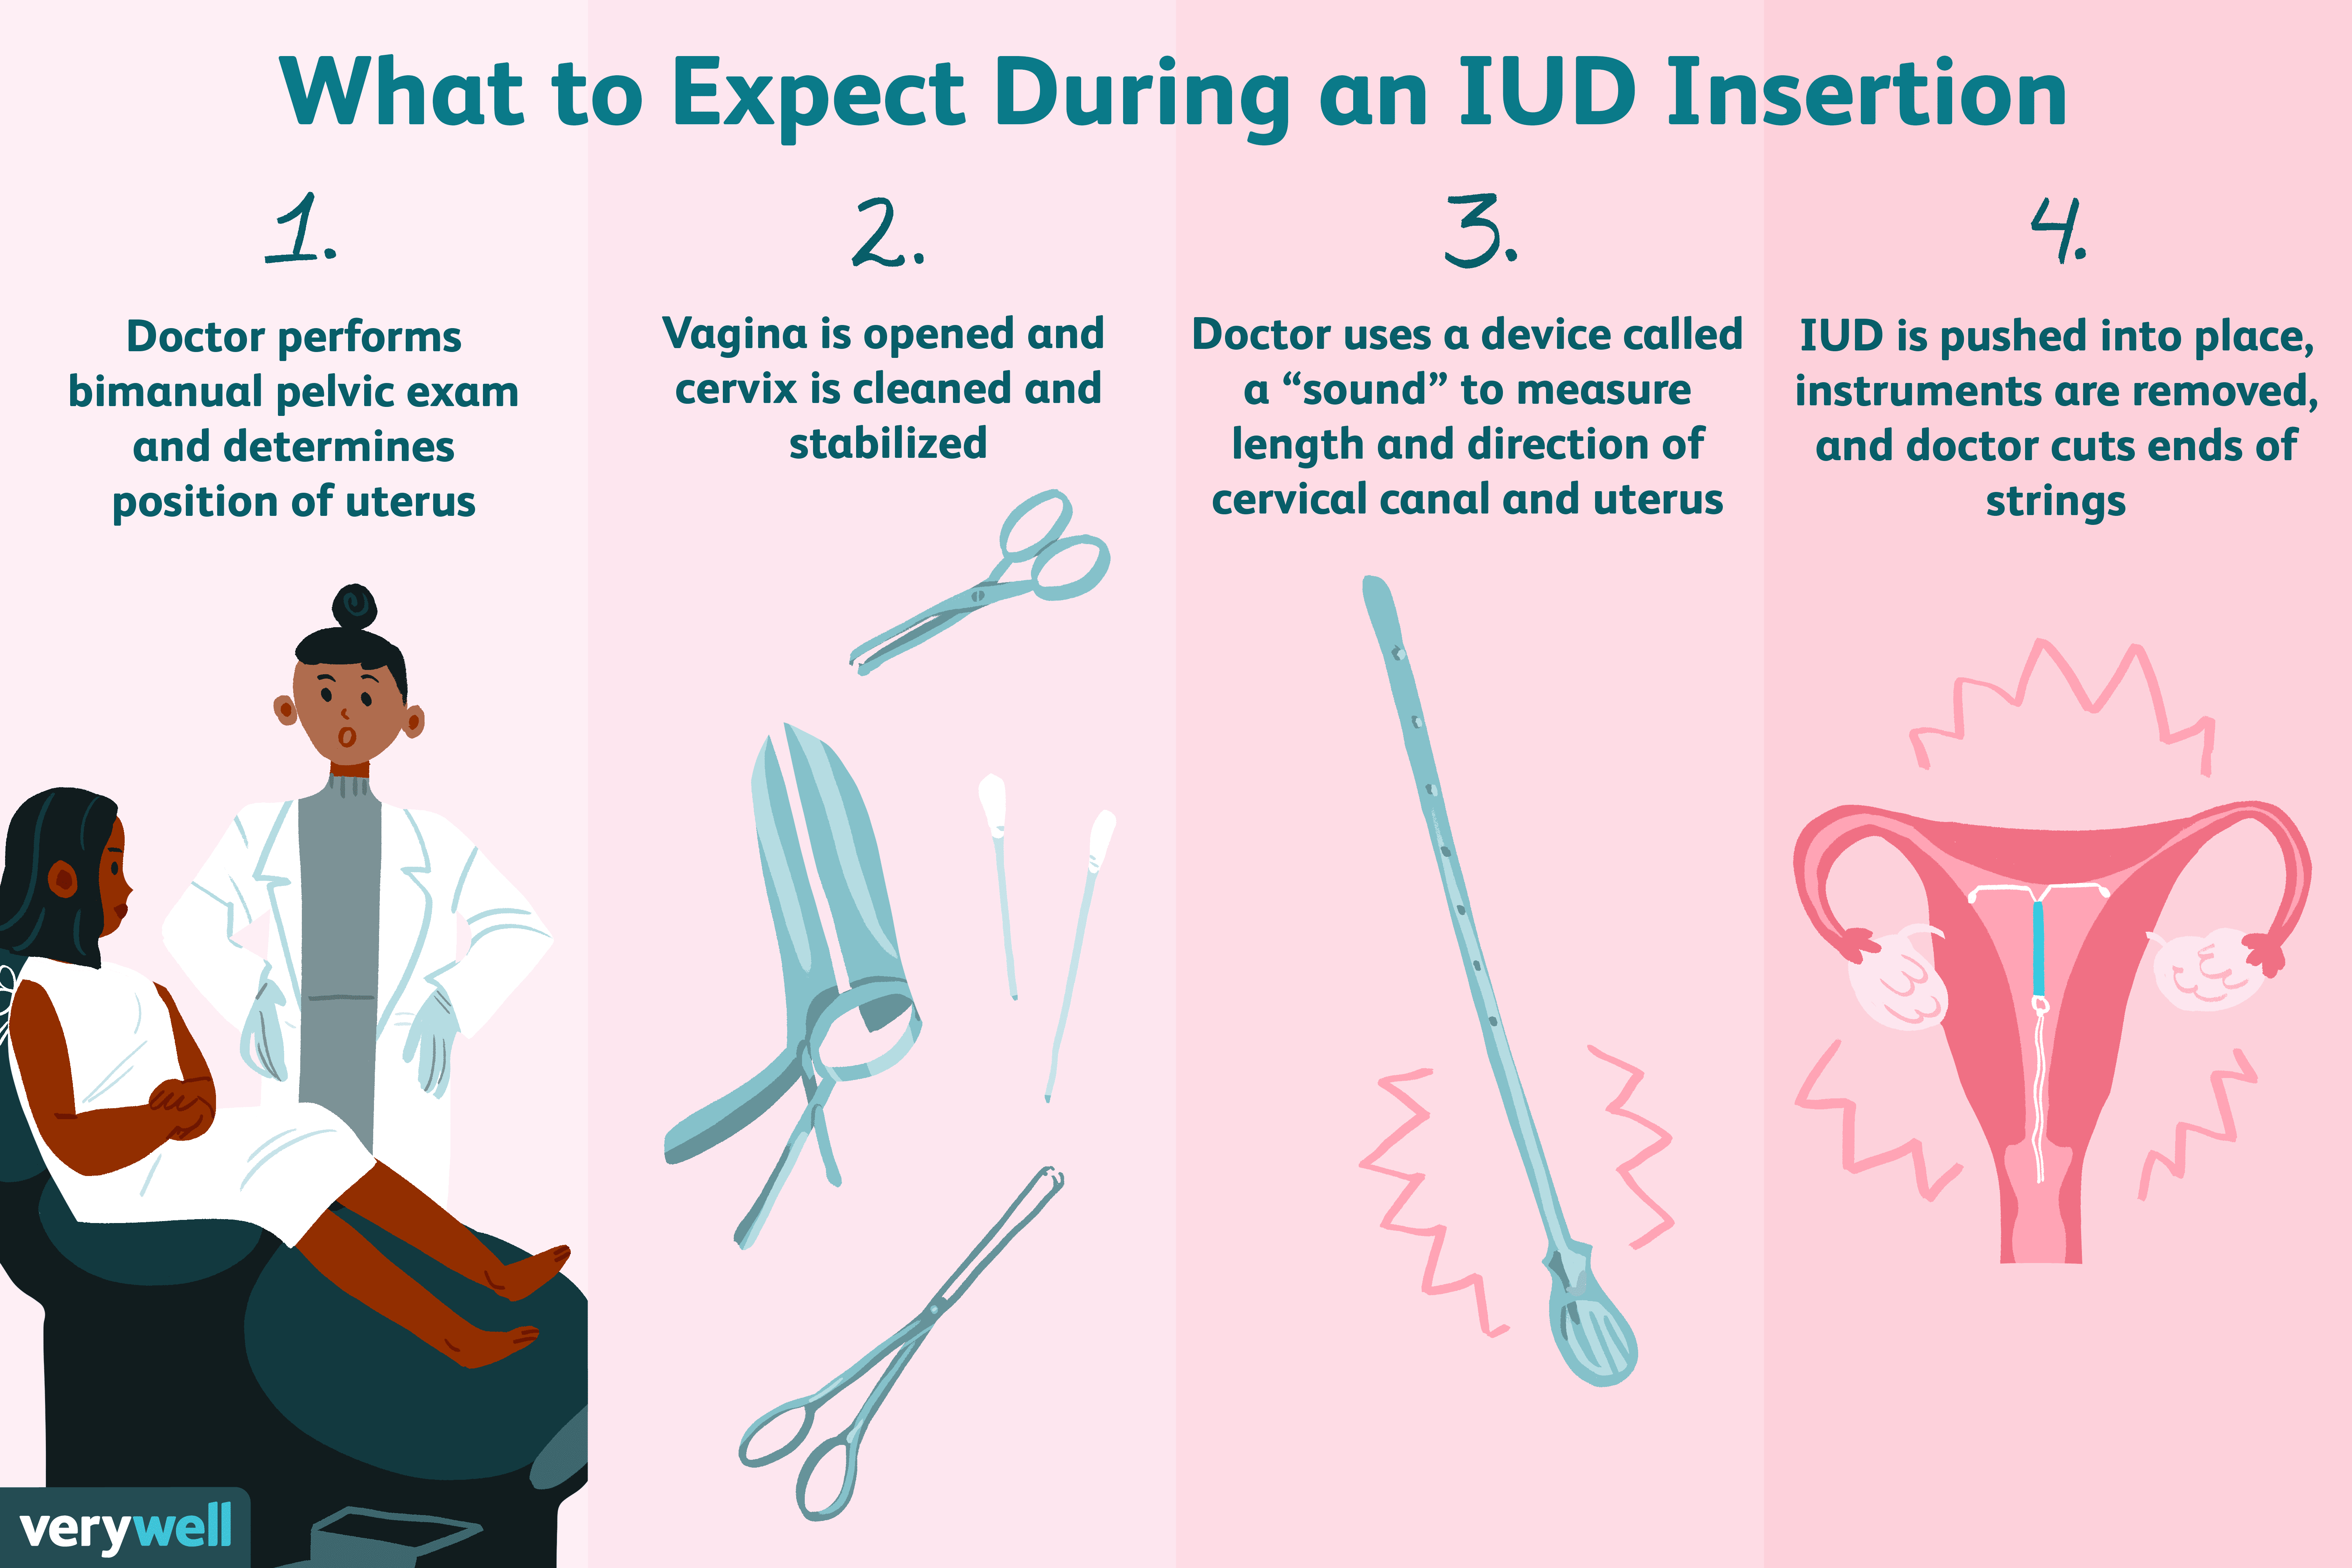 What to Expect During an IUD Insertion